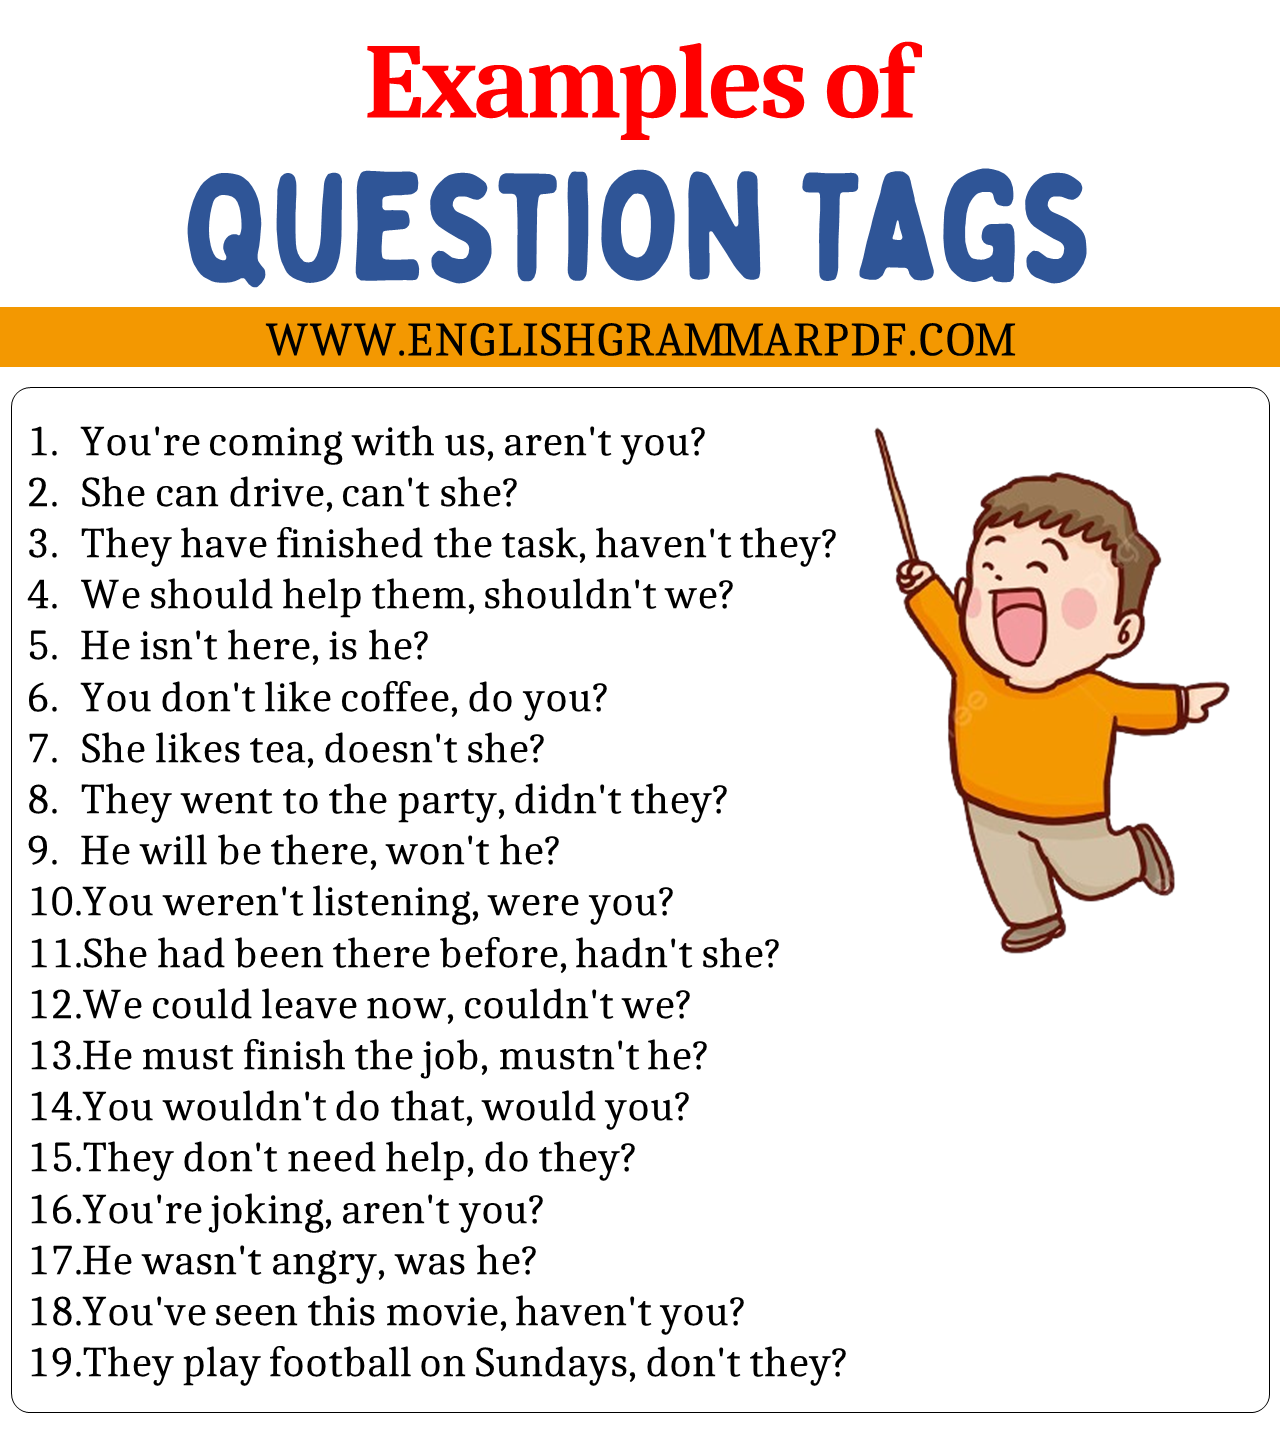 Examples of Question Tags